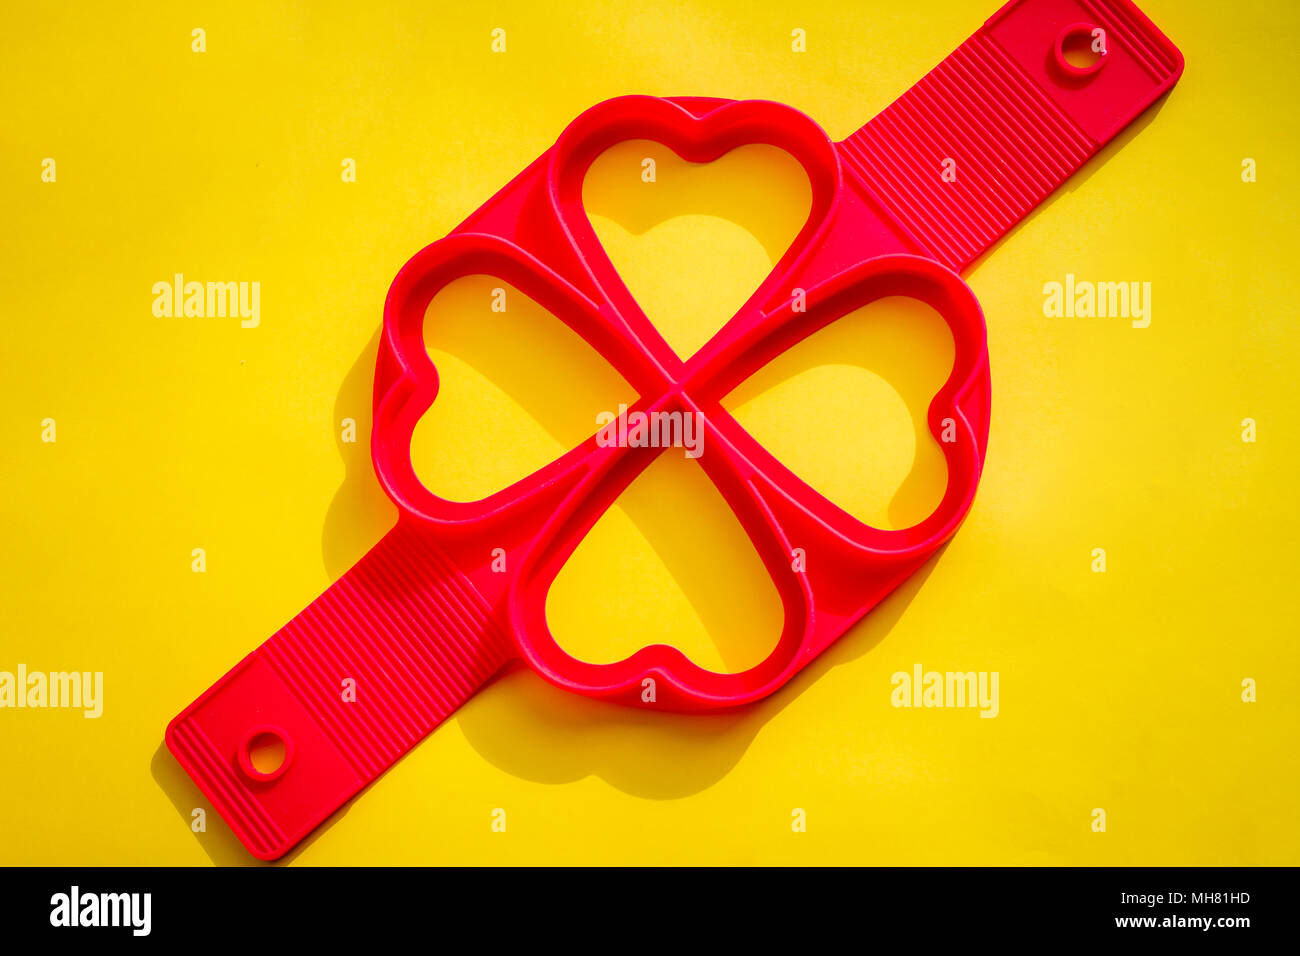 Red silicone mold on a yellow background.Silicone Heart Shape Egg Ring for Frying Pan.Frying egg with silicone form and teflon pan. molds for baking puncakes.bakery products Stock Photo